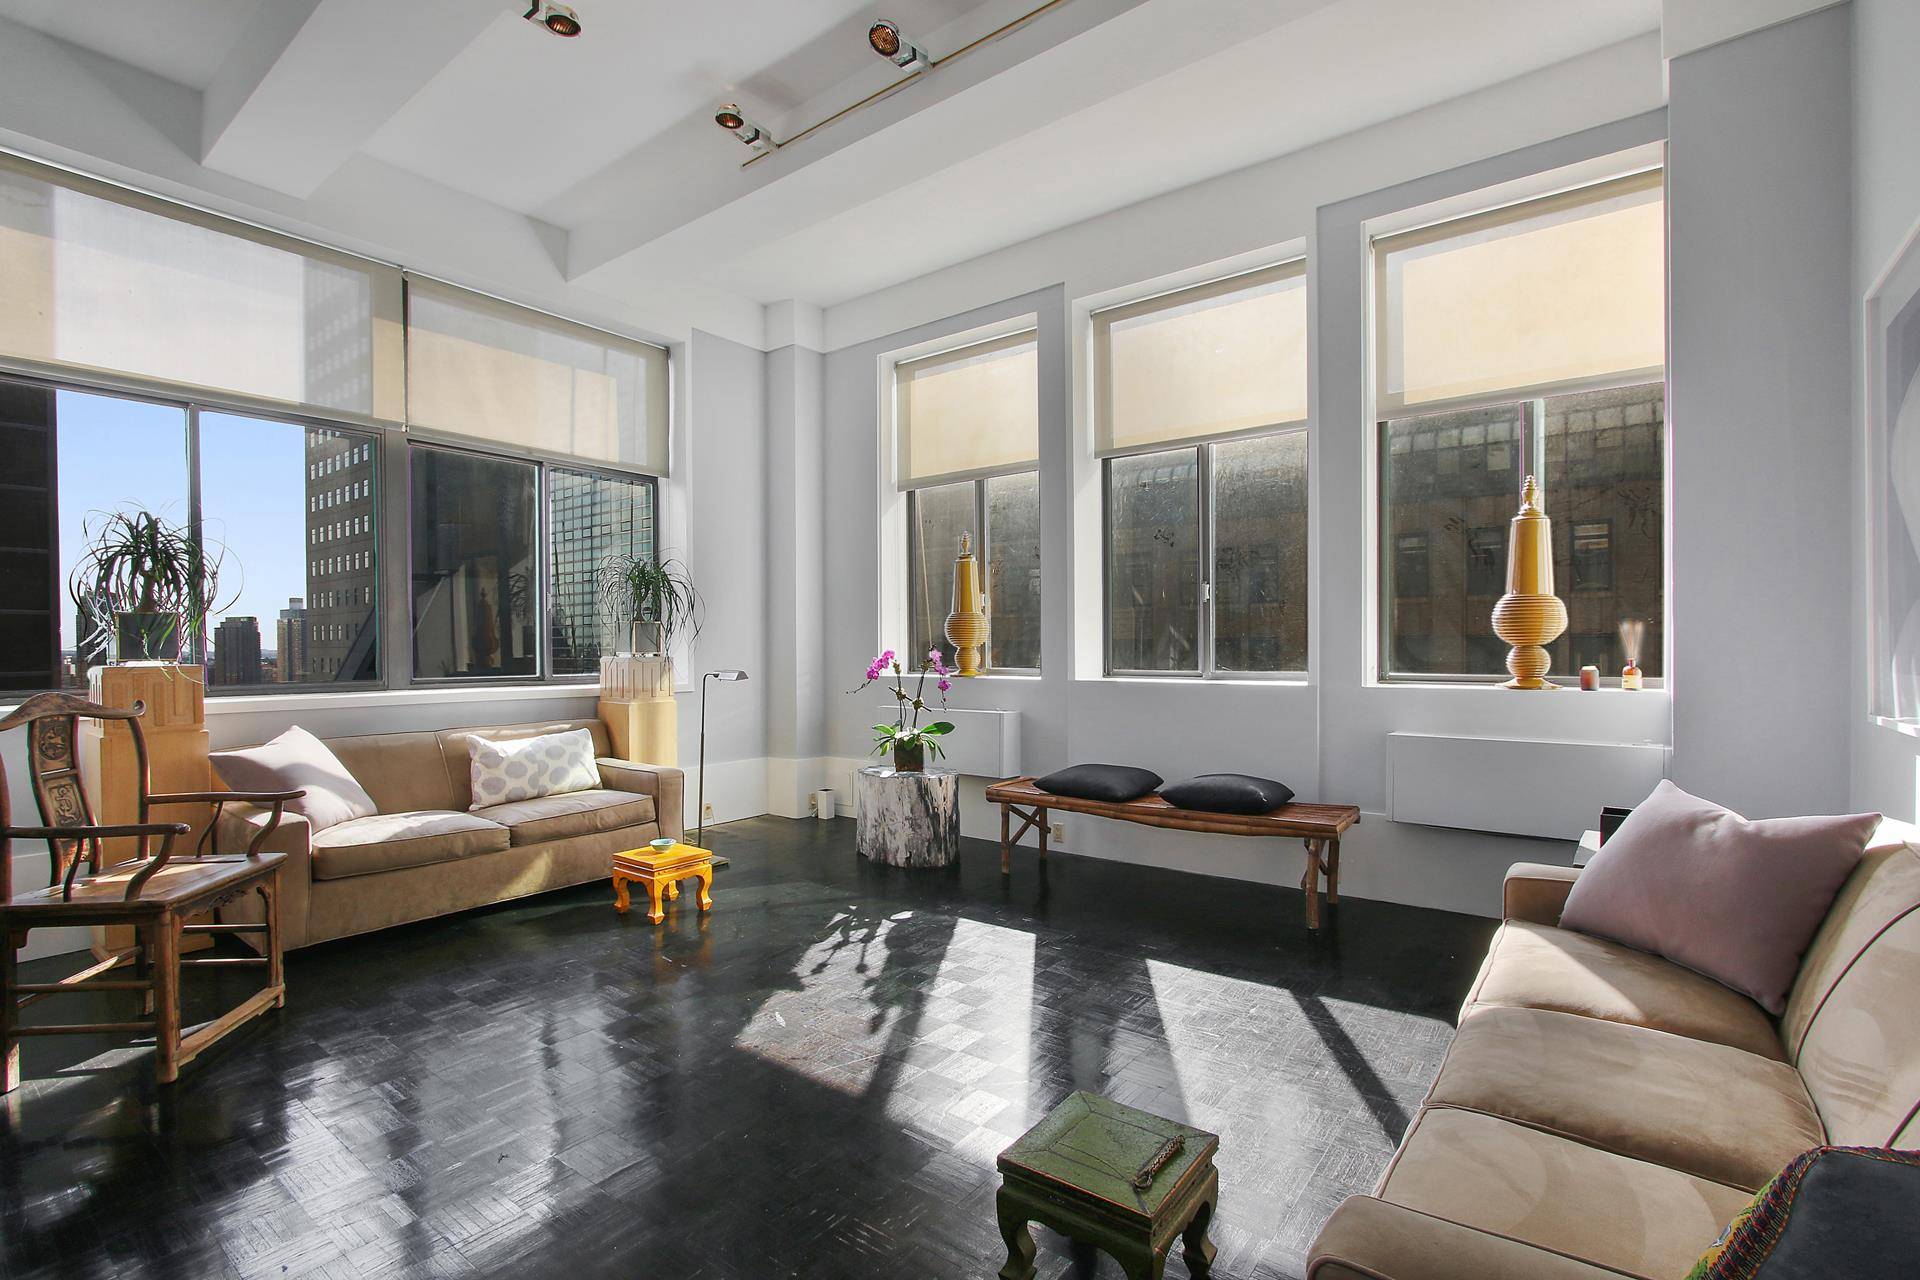 Experience stylish NYC living at its finest with this exceptional Midtown loft.